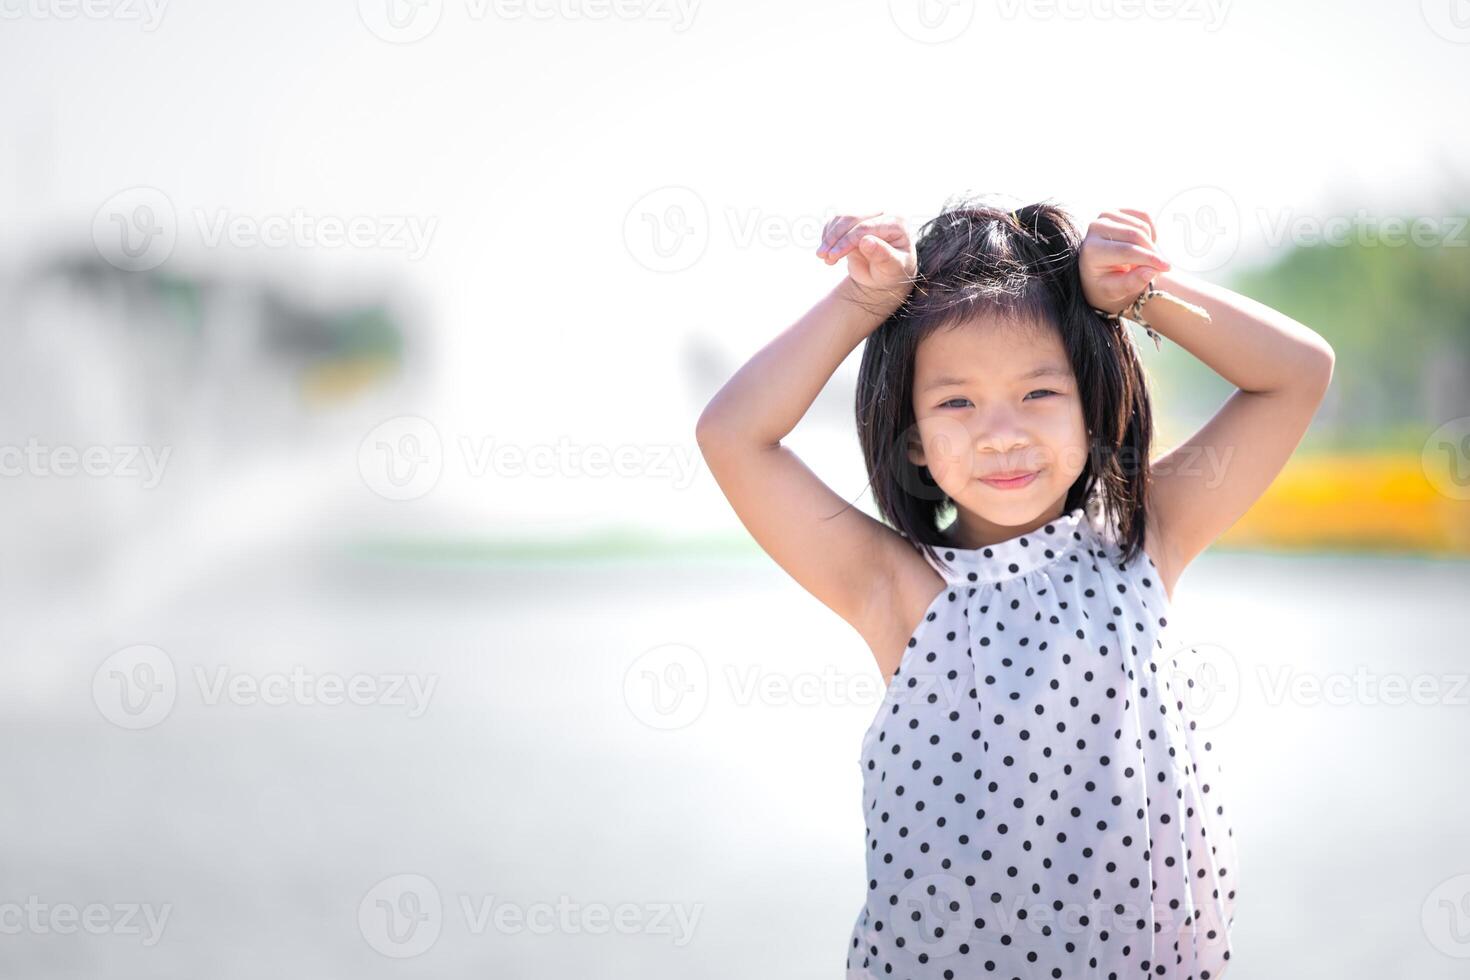 Happy Young Girl Smiling in Sunlit Park, Beaming Kid with her hands on her hair enjoys radiant, sunny day in the park, with a soft-focus fountain in the background creating a serene atmosphere. photo